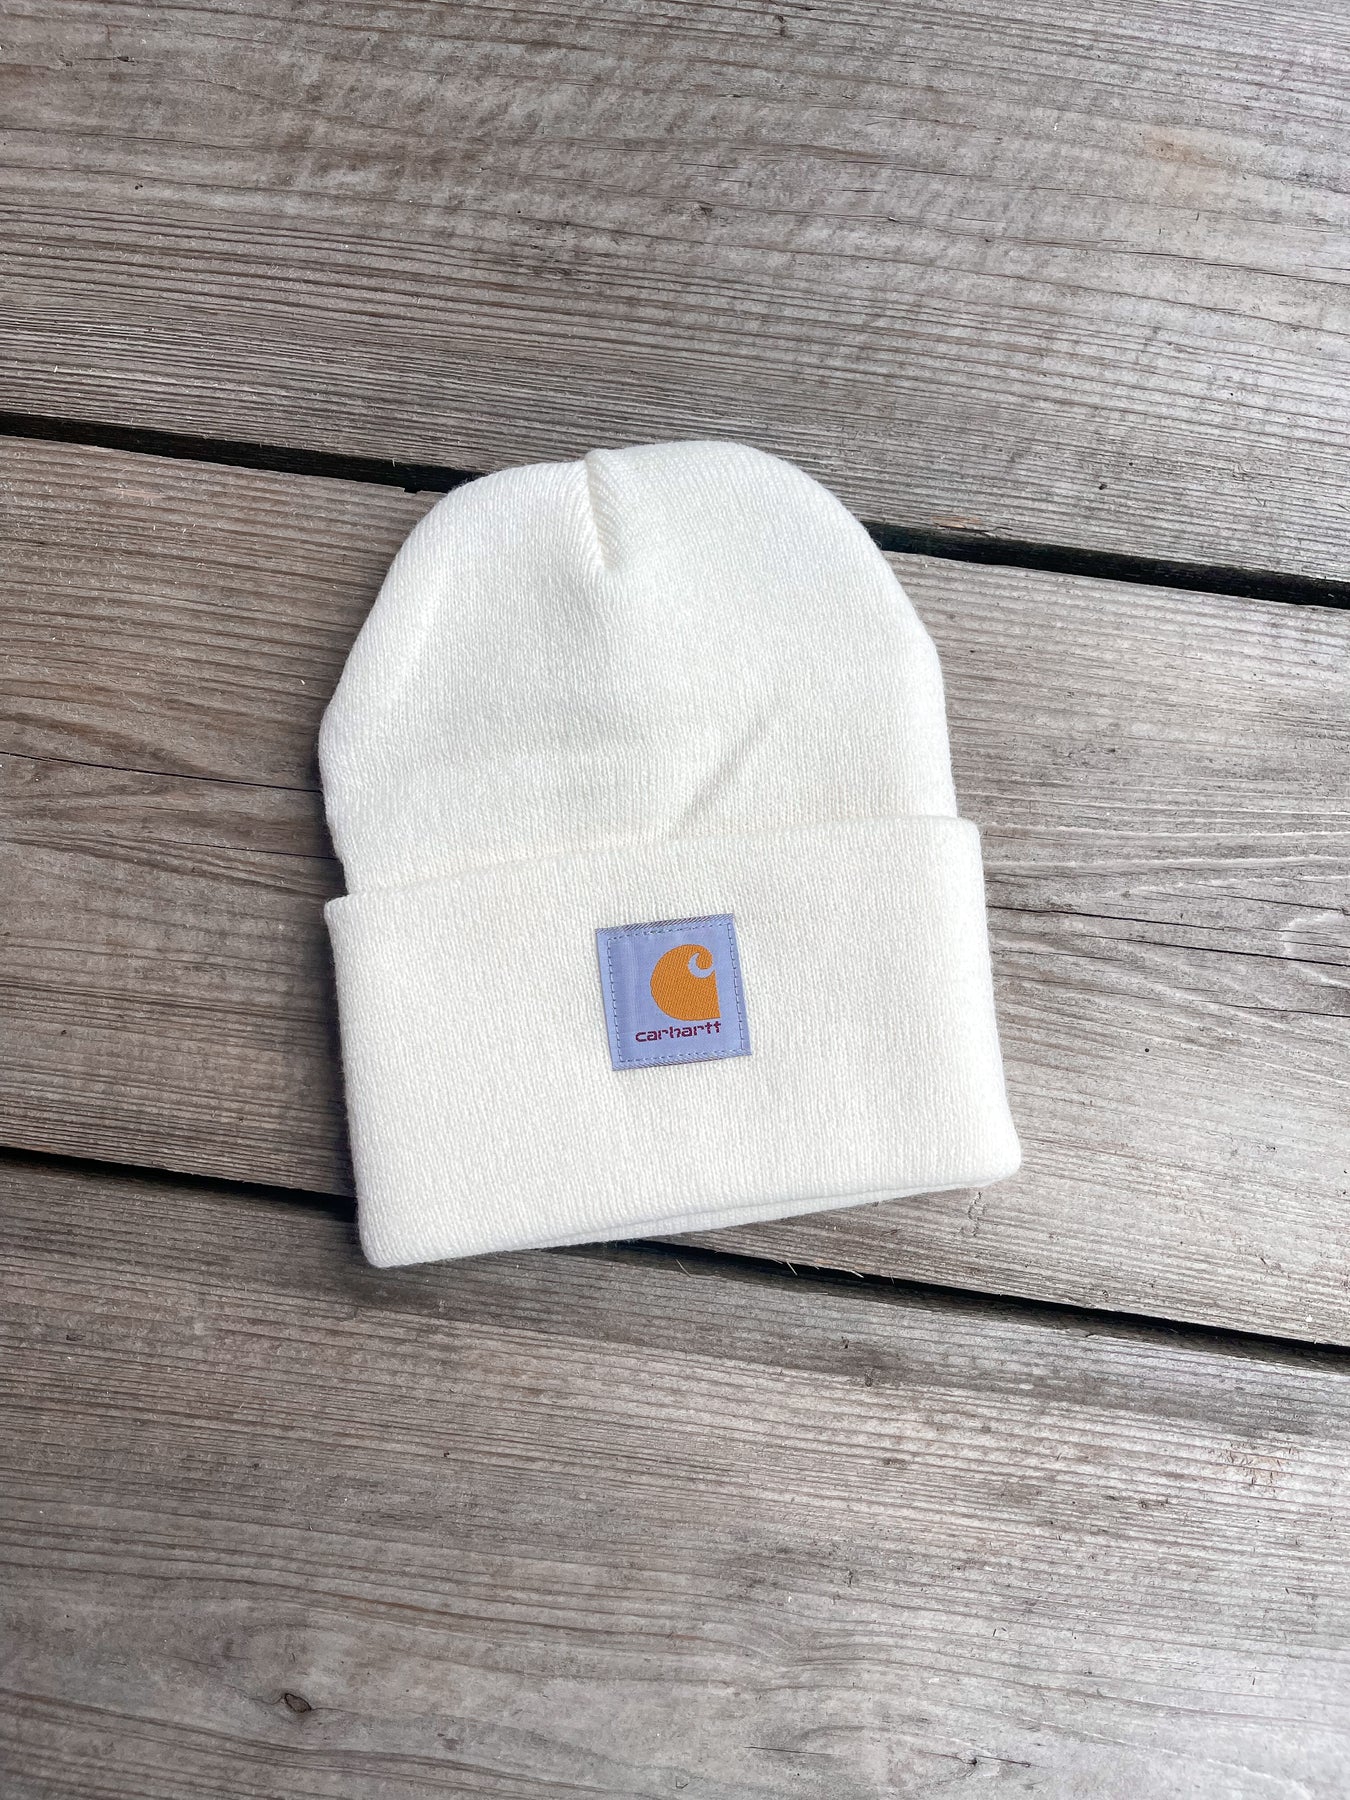 IN CARHARTT – Country KNIT BEANIE Boot CUFFED WHITE